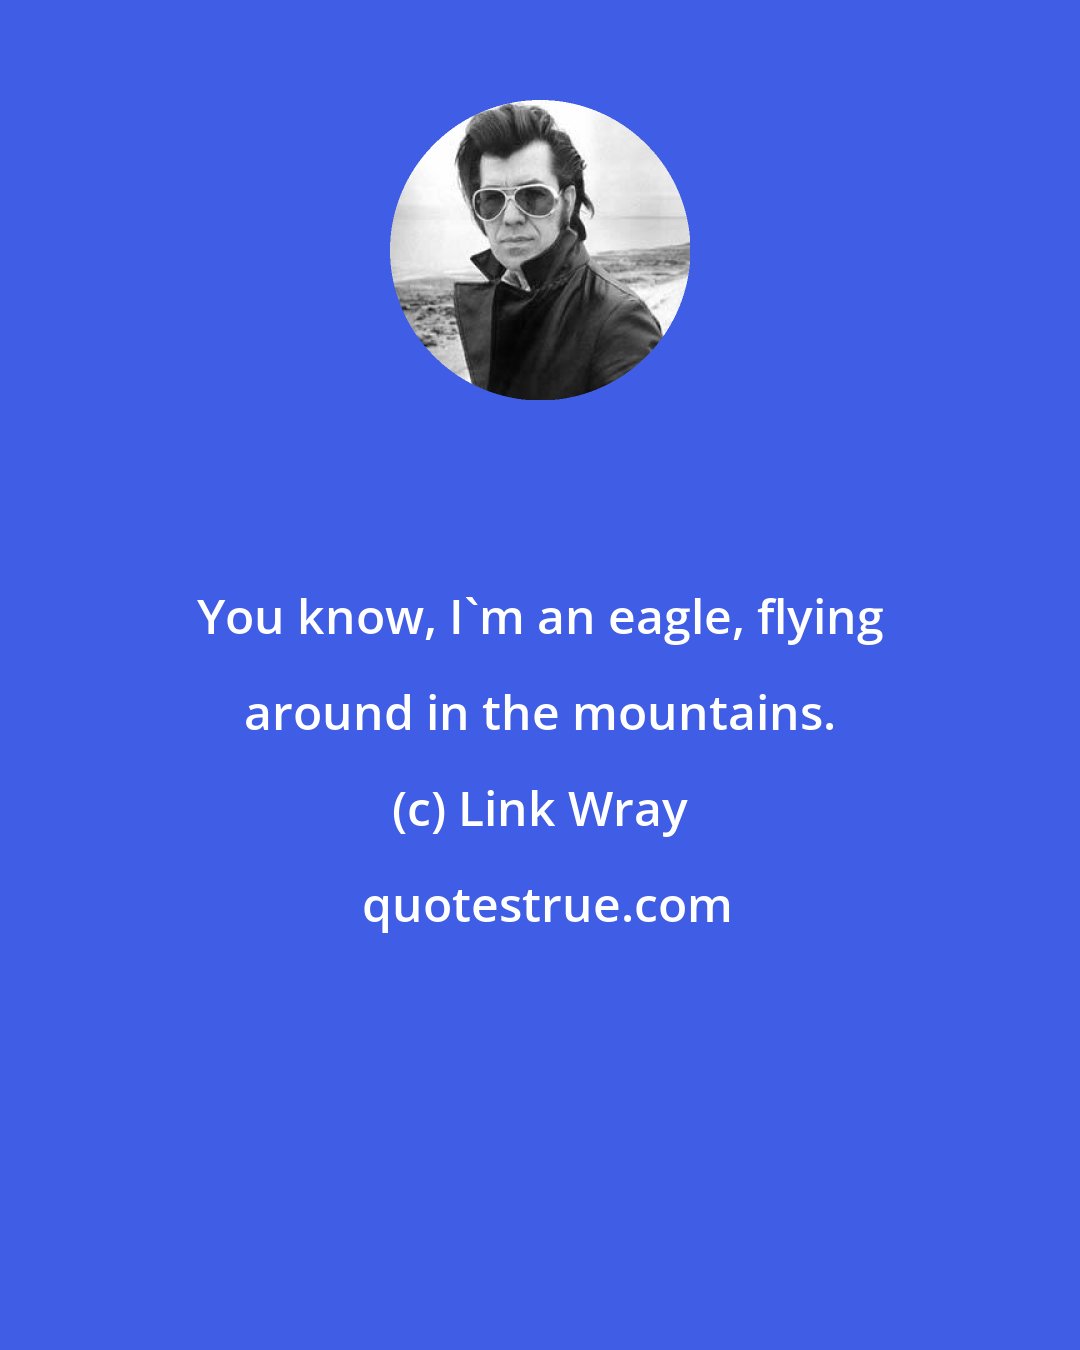 Link Wray: You know, I'm an eagle, flying around in the mountains.